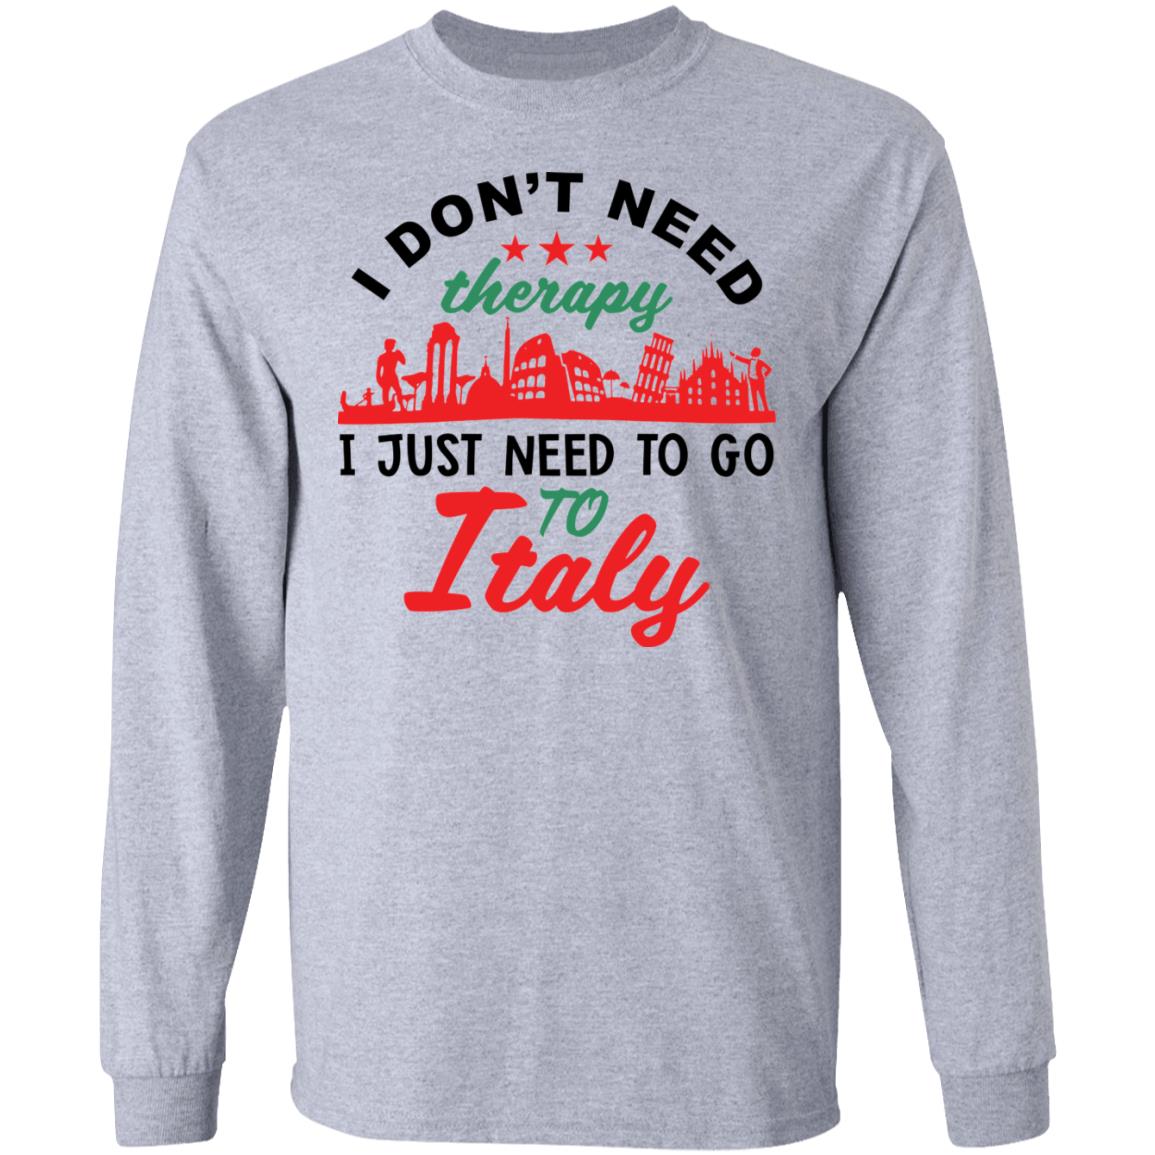 I don’t need therapy i just need to go to Italy shirt - Bucktee.com